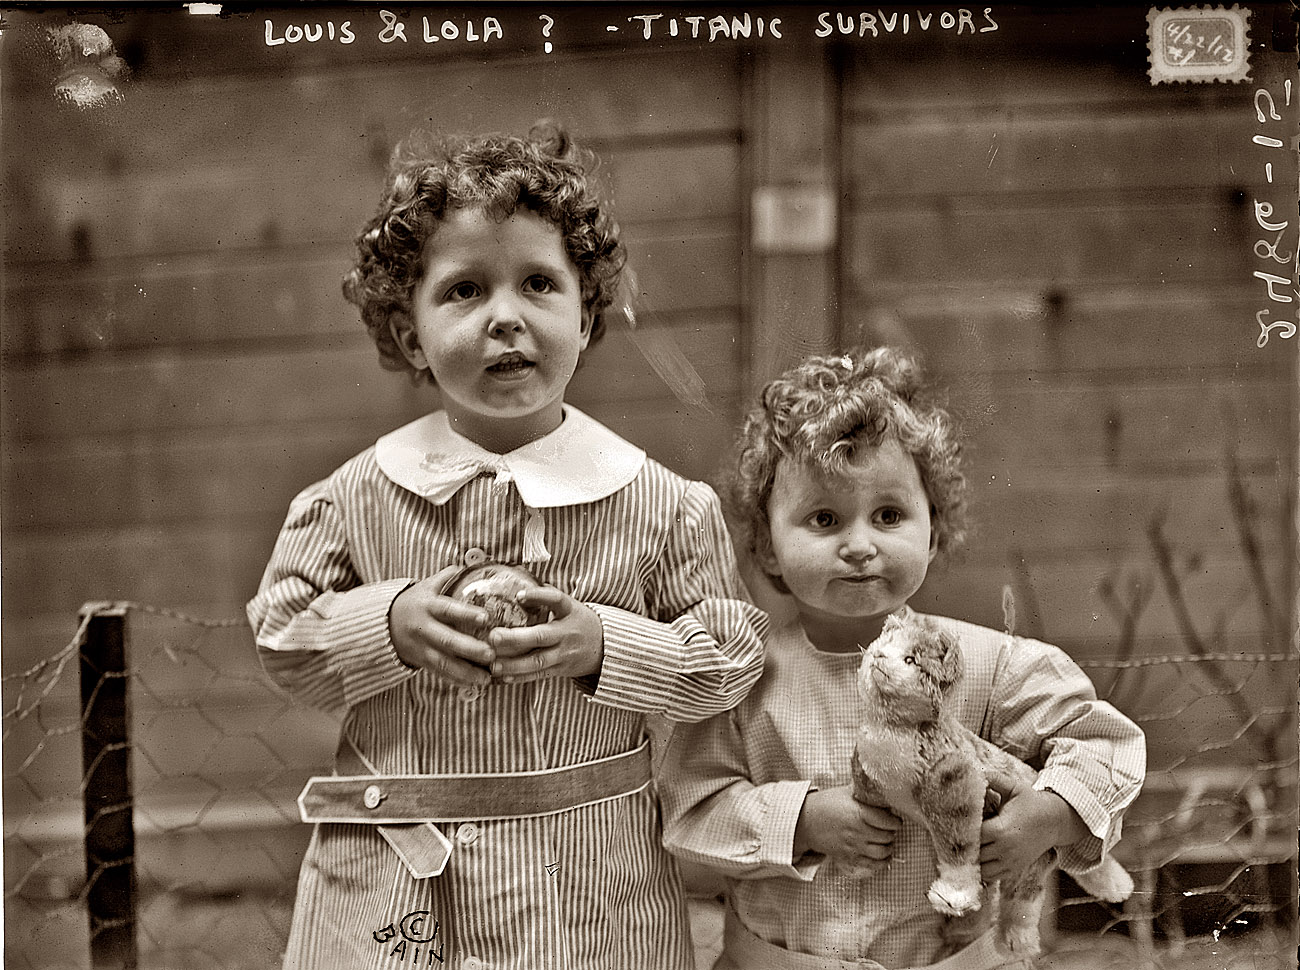 April 22, 1912. Our second look at Lolo (Michel) and Edmond Navratil, survivors of the Titanic disaster whose father went down with the ship. View full size. Lolo, the last remaining male survivor of the Titanic sinking, died in 2001.